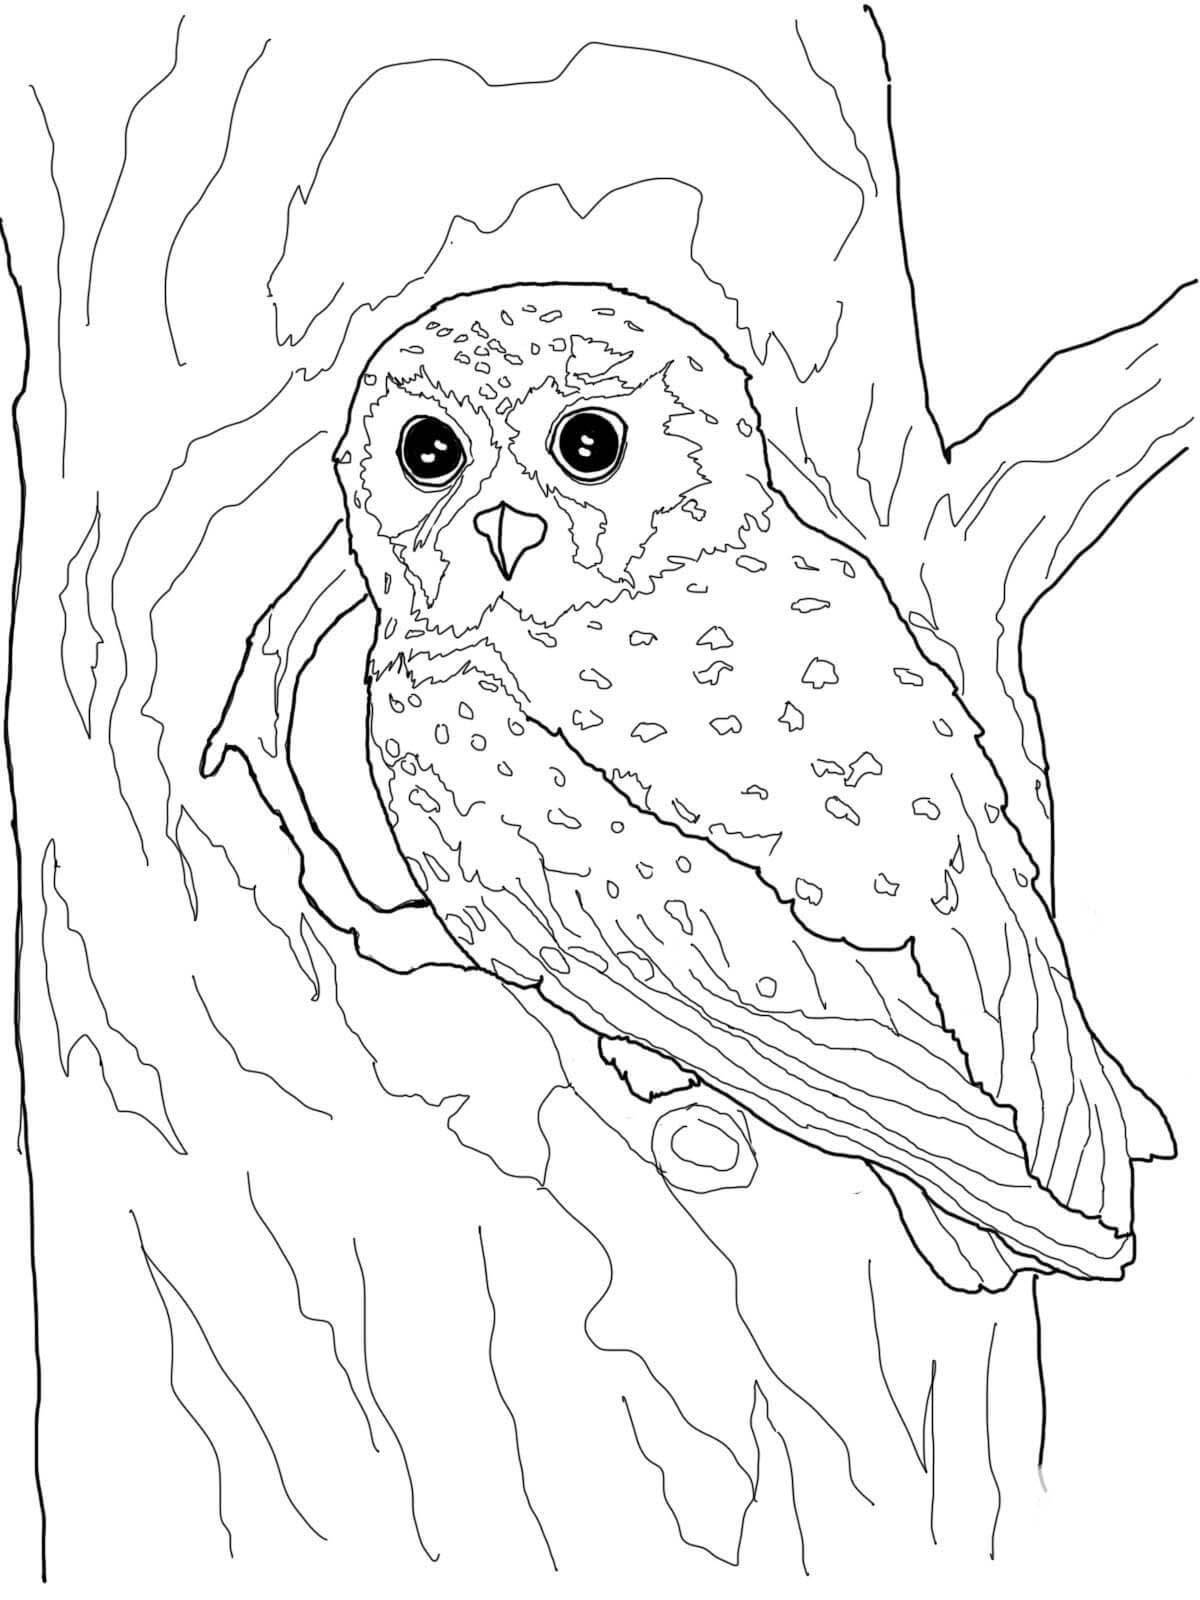 Fabulous snowy owl coloring book for kids